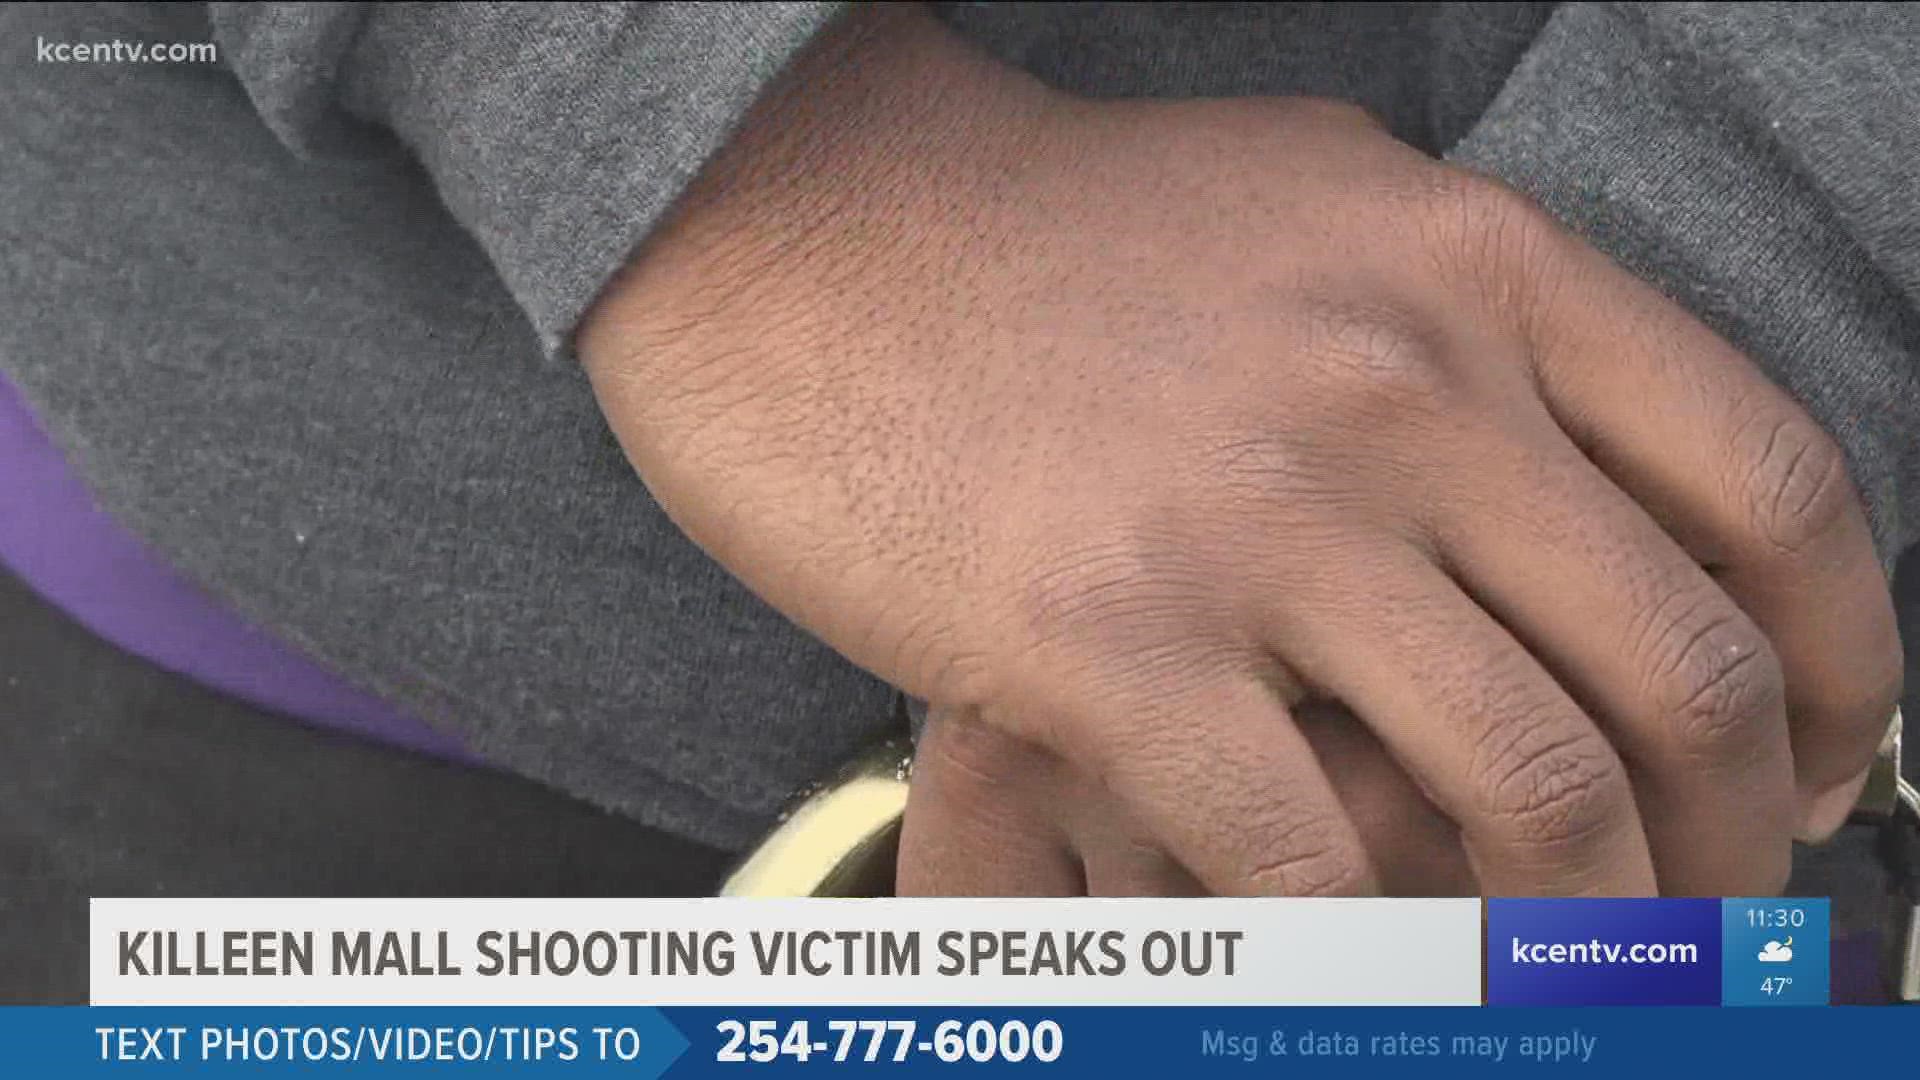 6 News spoke exclusively to the 21-year-old man who was shot at approximately ten times back in early December at the Killeen Mall Sunday evening.